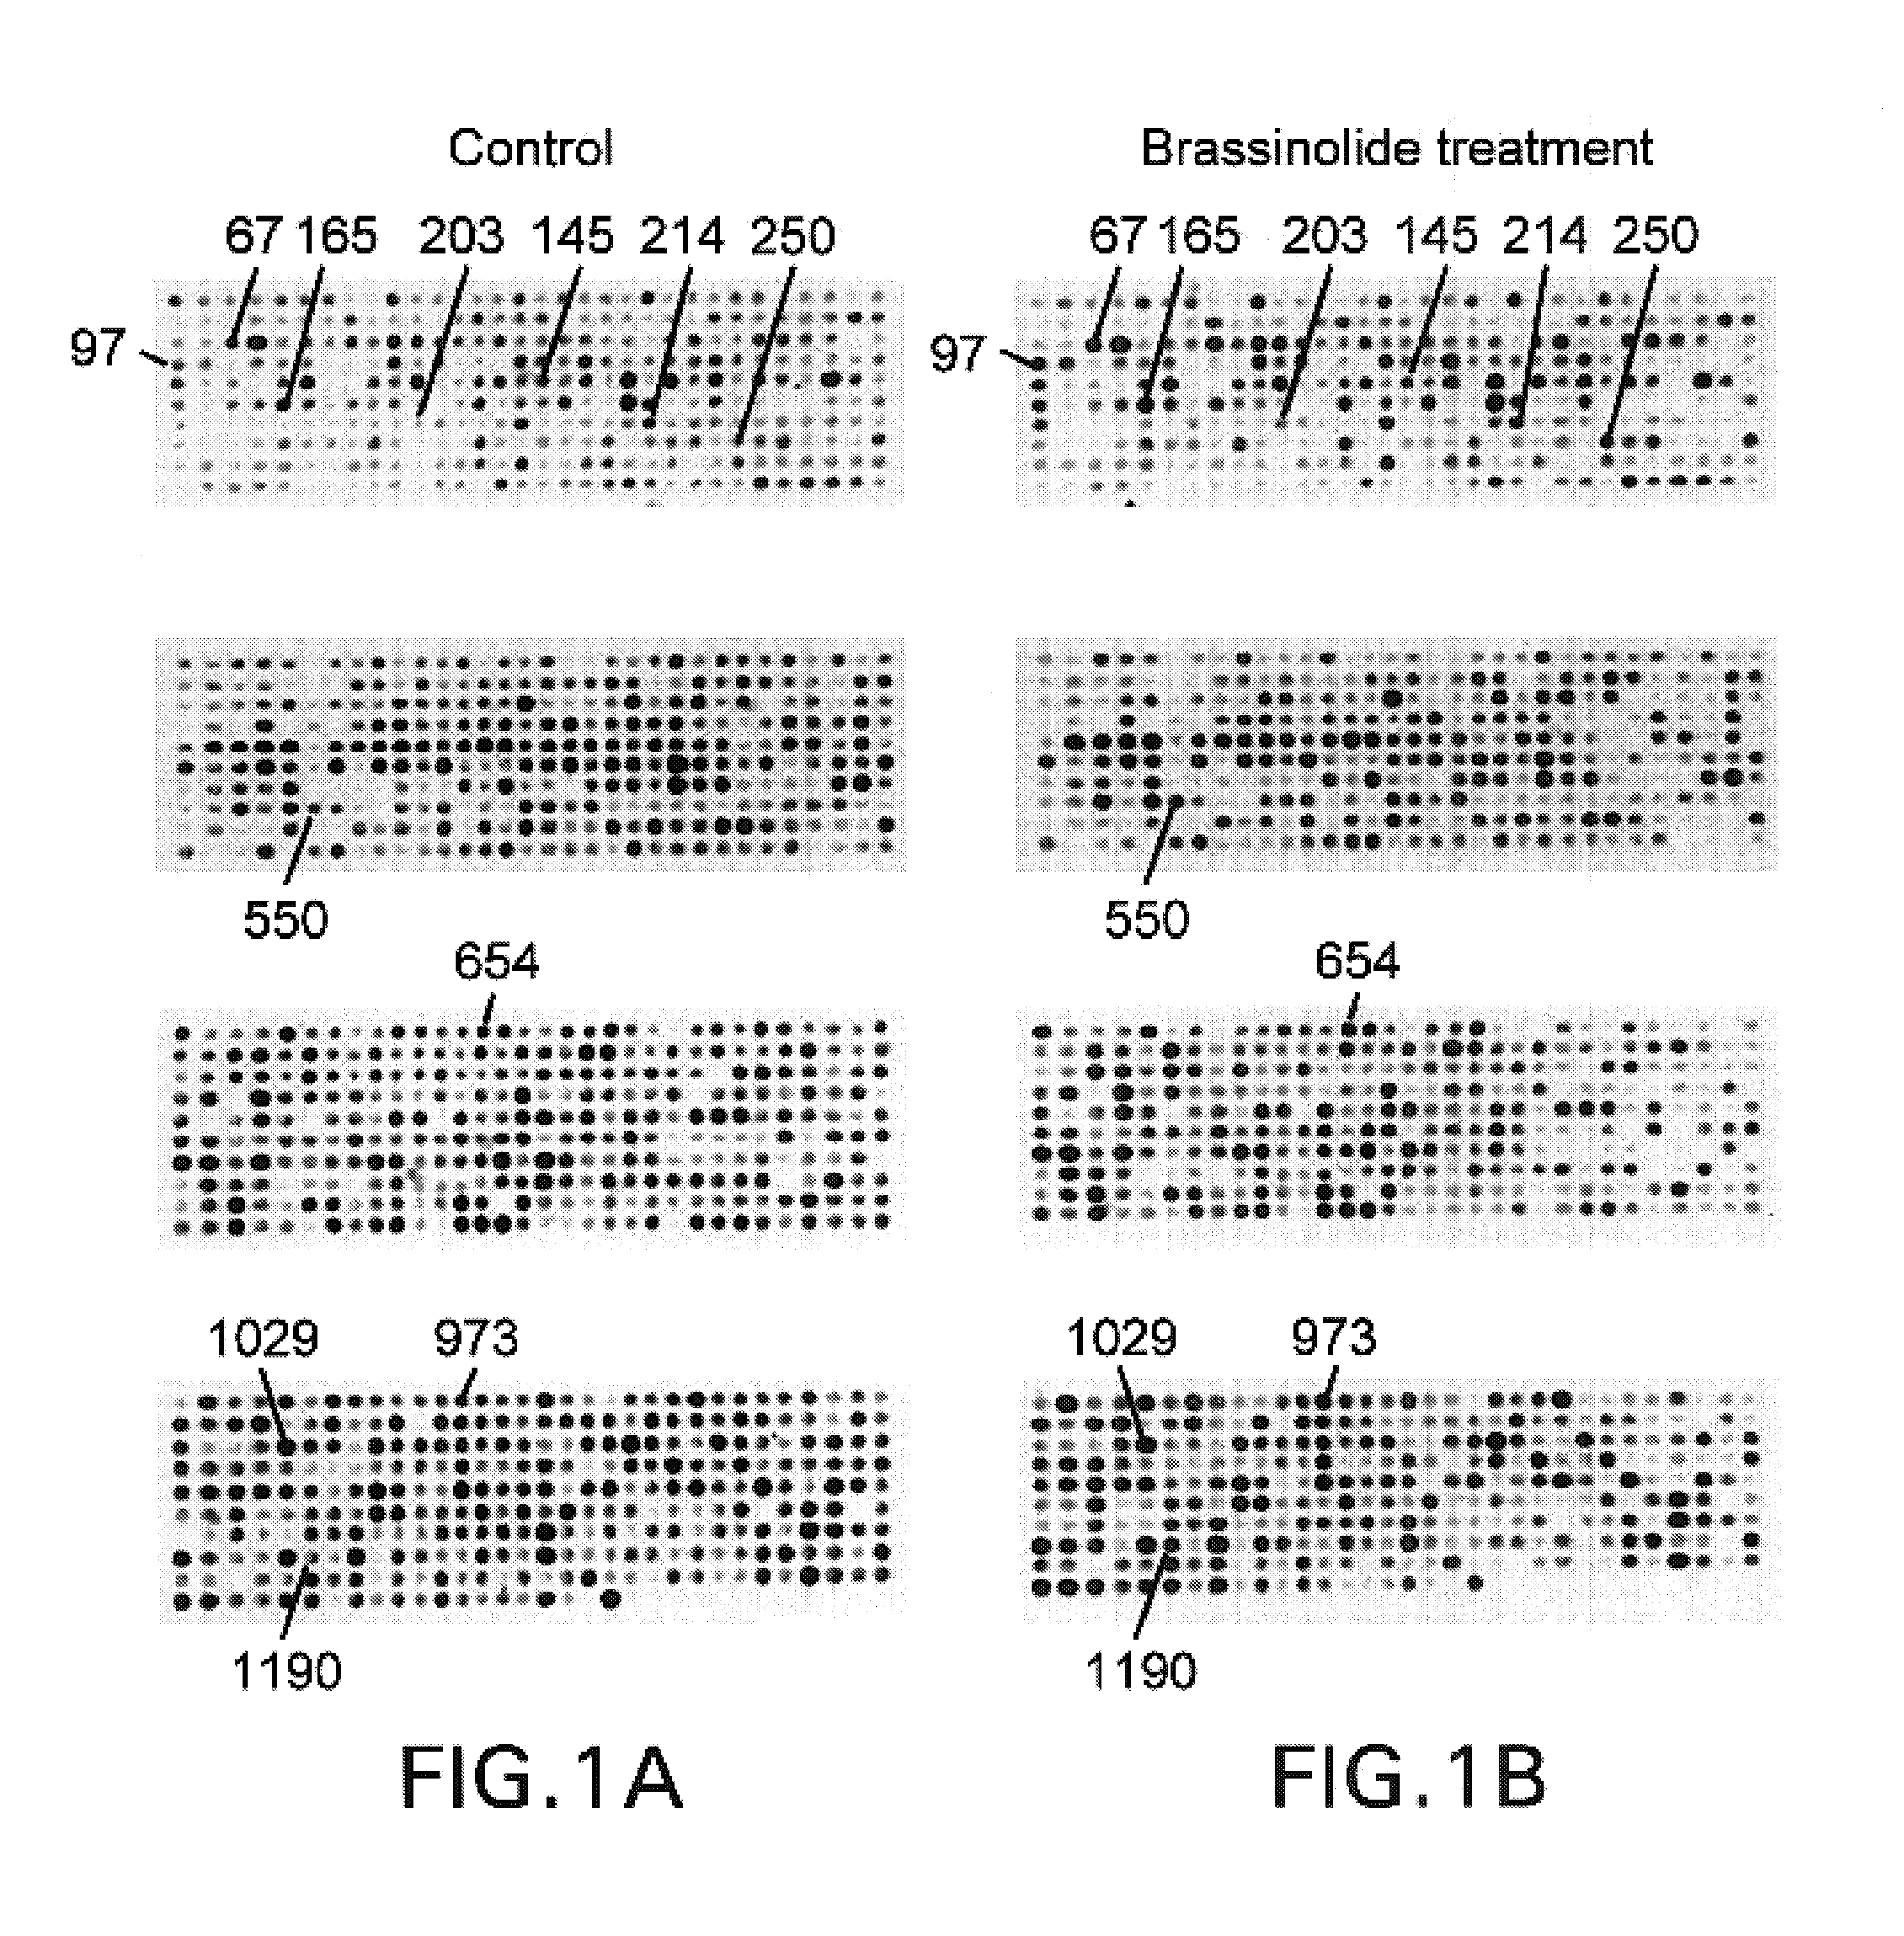 Plant brassinolide responsive genes and use thereof